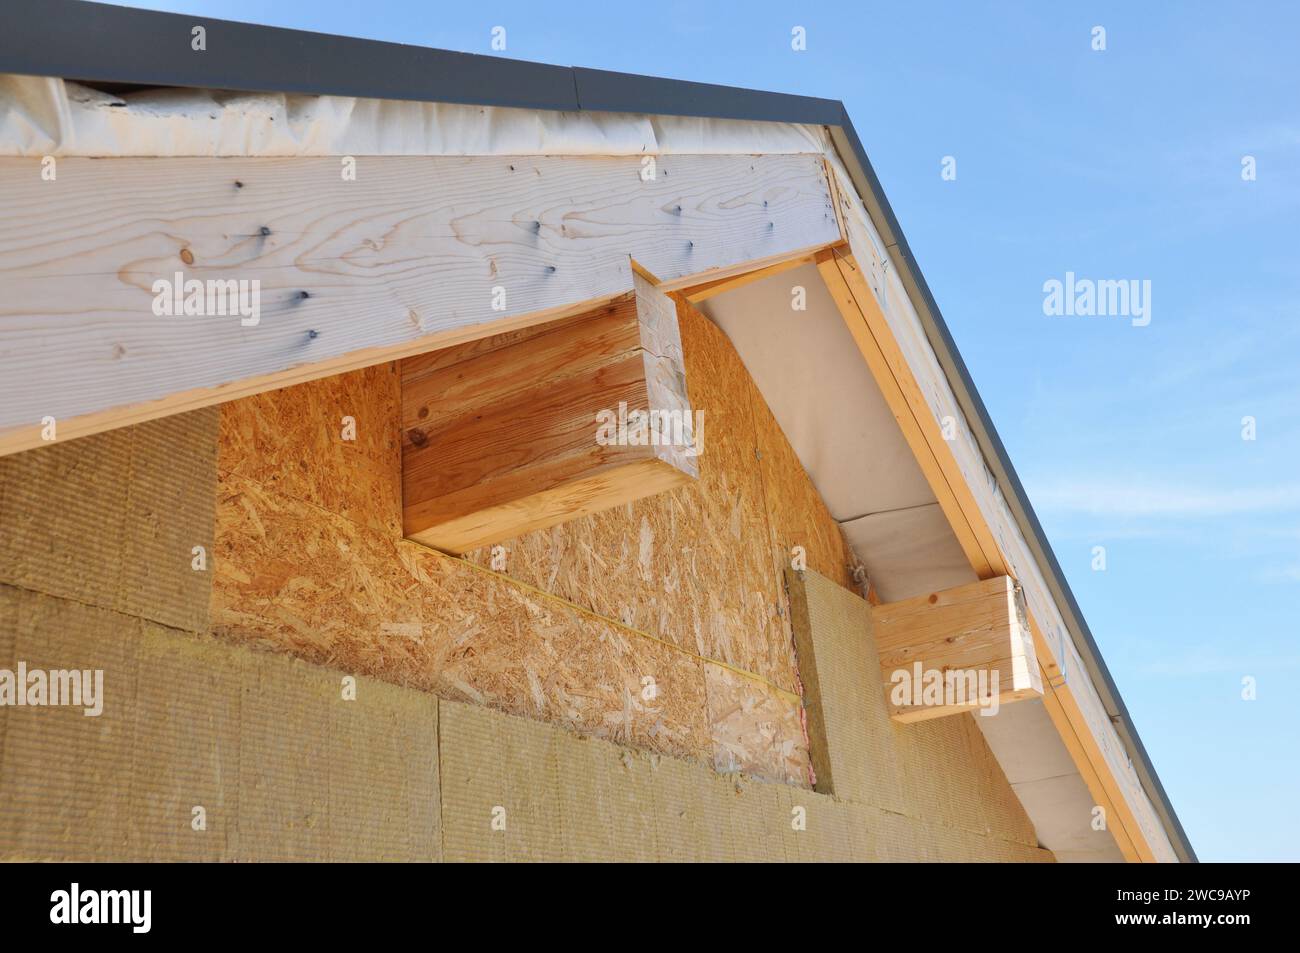 Insulating with Mineral Rock Wool Attic Roof Outdoors. Close up on exterior insulation layers of mineral wool insulation, house roof insulation Stock Photo